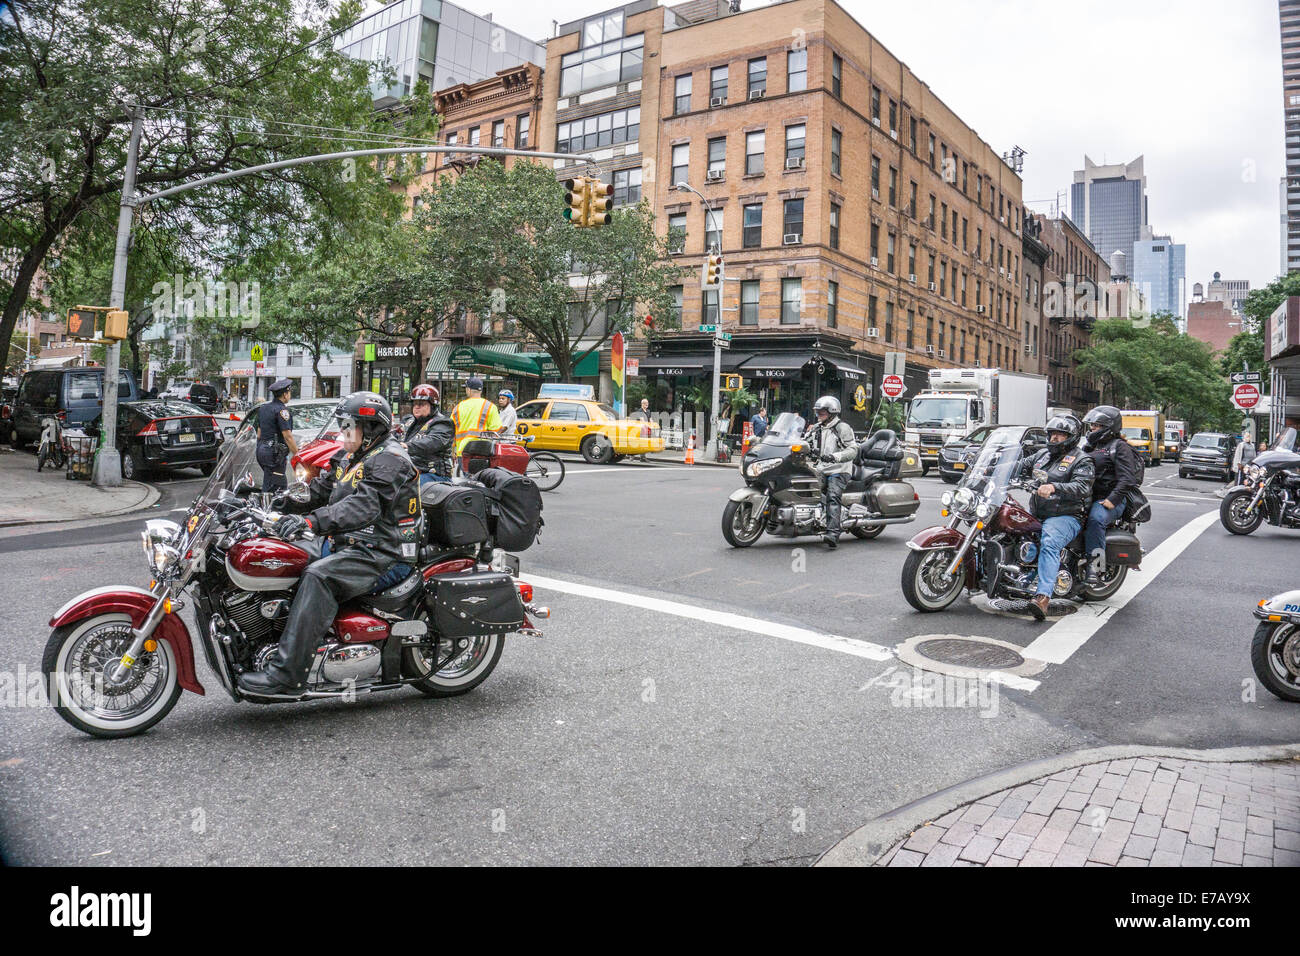 New York City, Thursday, September 11, 2014, USA : in honor of the 13th anniversary of September 11th, more than 250 motorcycle riders participate in a 9/11 Memorial Ride originating in Albany, the state Capital. Among the riders are representatives of local fire and police departments from communities across New York State, including New York City; also State Police & Veterans Associations. On arrival, the riders parking parked their motorcycle motorcycles to be greeted with lunch in front of Rescue 1 Firehouse on 43rd Street. Credit:  Dorothy Alexander/Alamy Live News Stock Photo